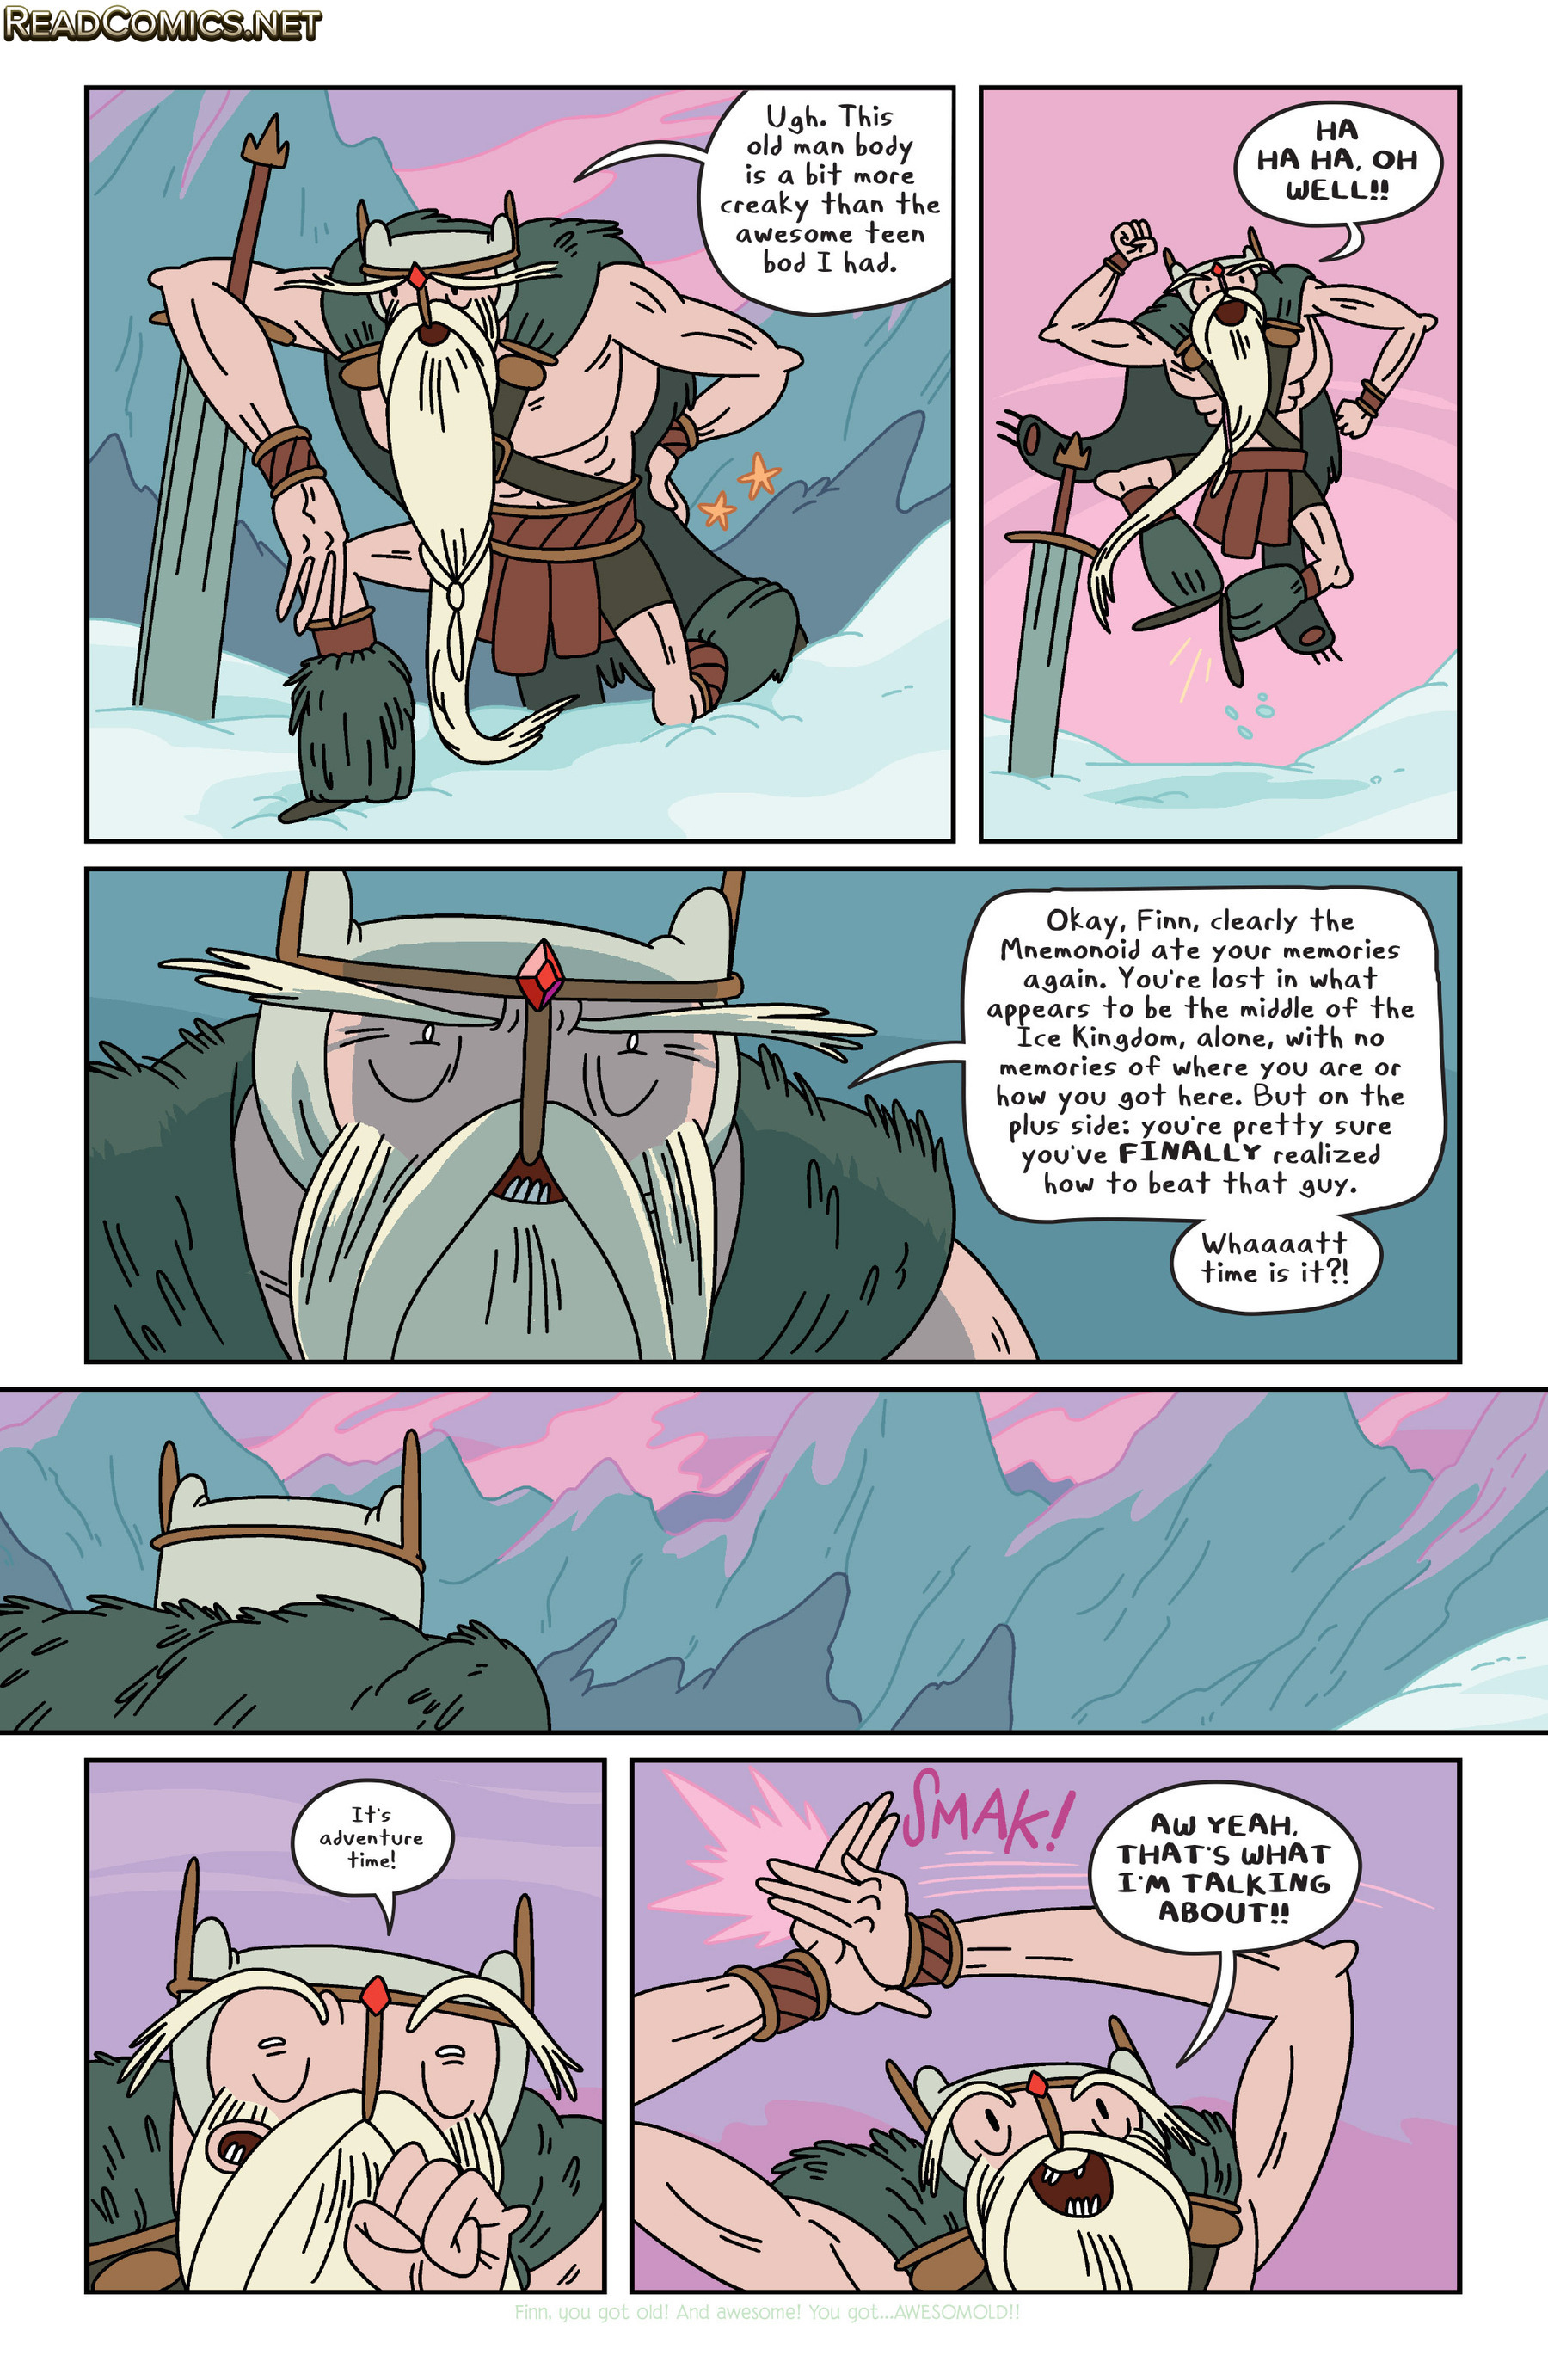 Adventure Time (2012-): Chapter 34 - Page 3